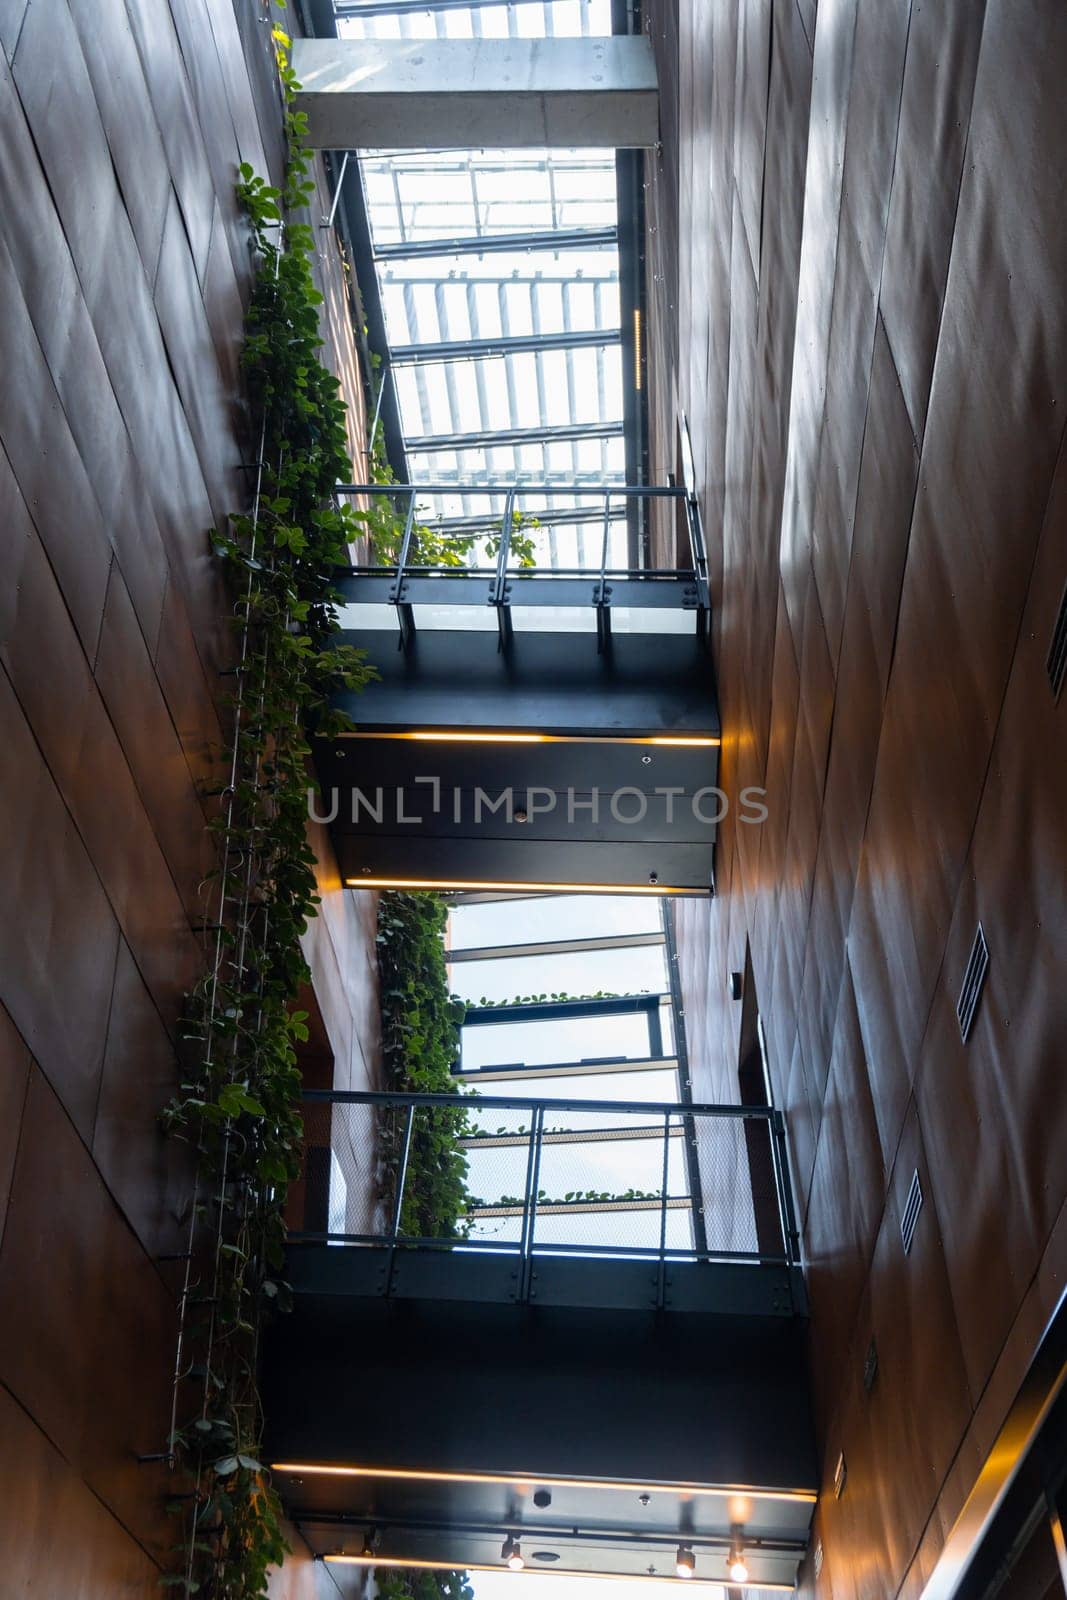 Indoor trees Modern interior design in European Solidarity Centre Gdansk Poland. Biophilia design connecting with nature green areas. Modern abstract museum in Europe. Travel destination tourist attraction